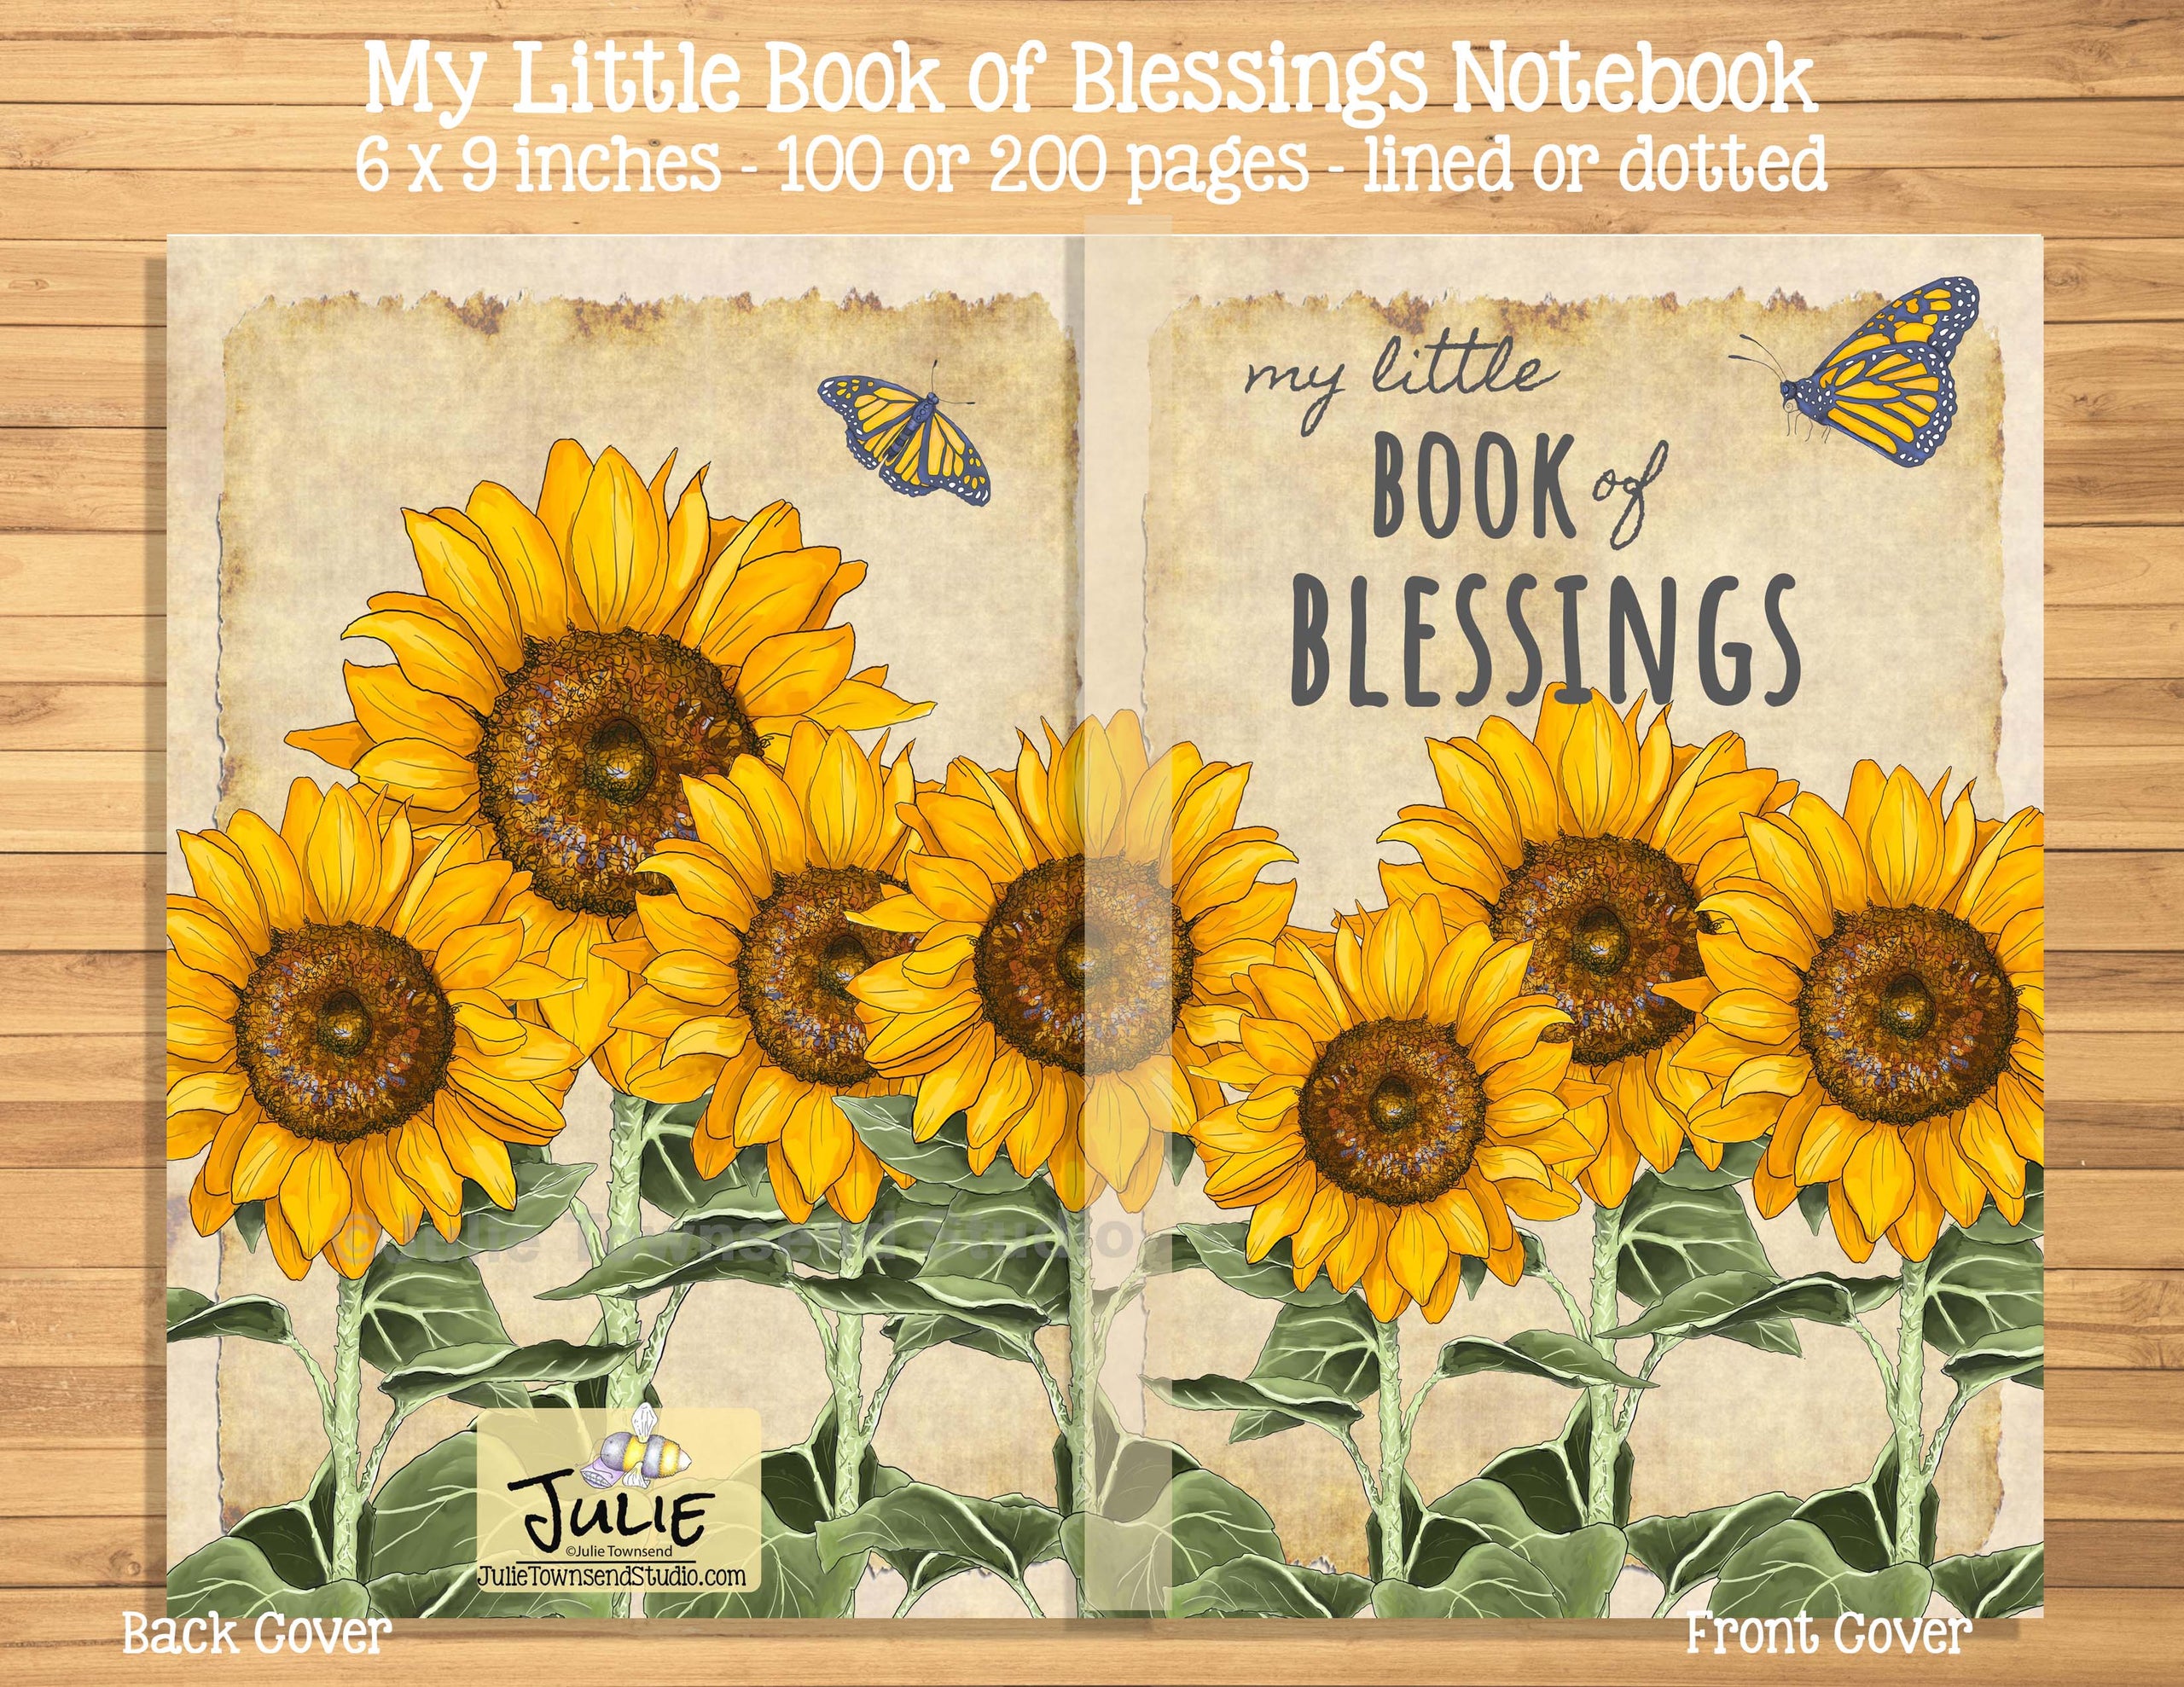 My Little Book of Blessings Notebook